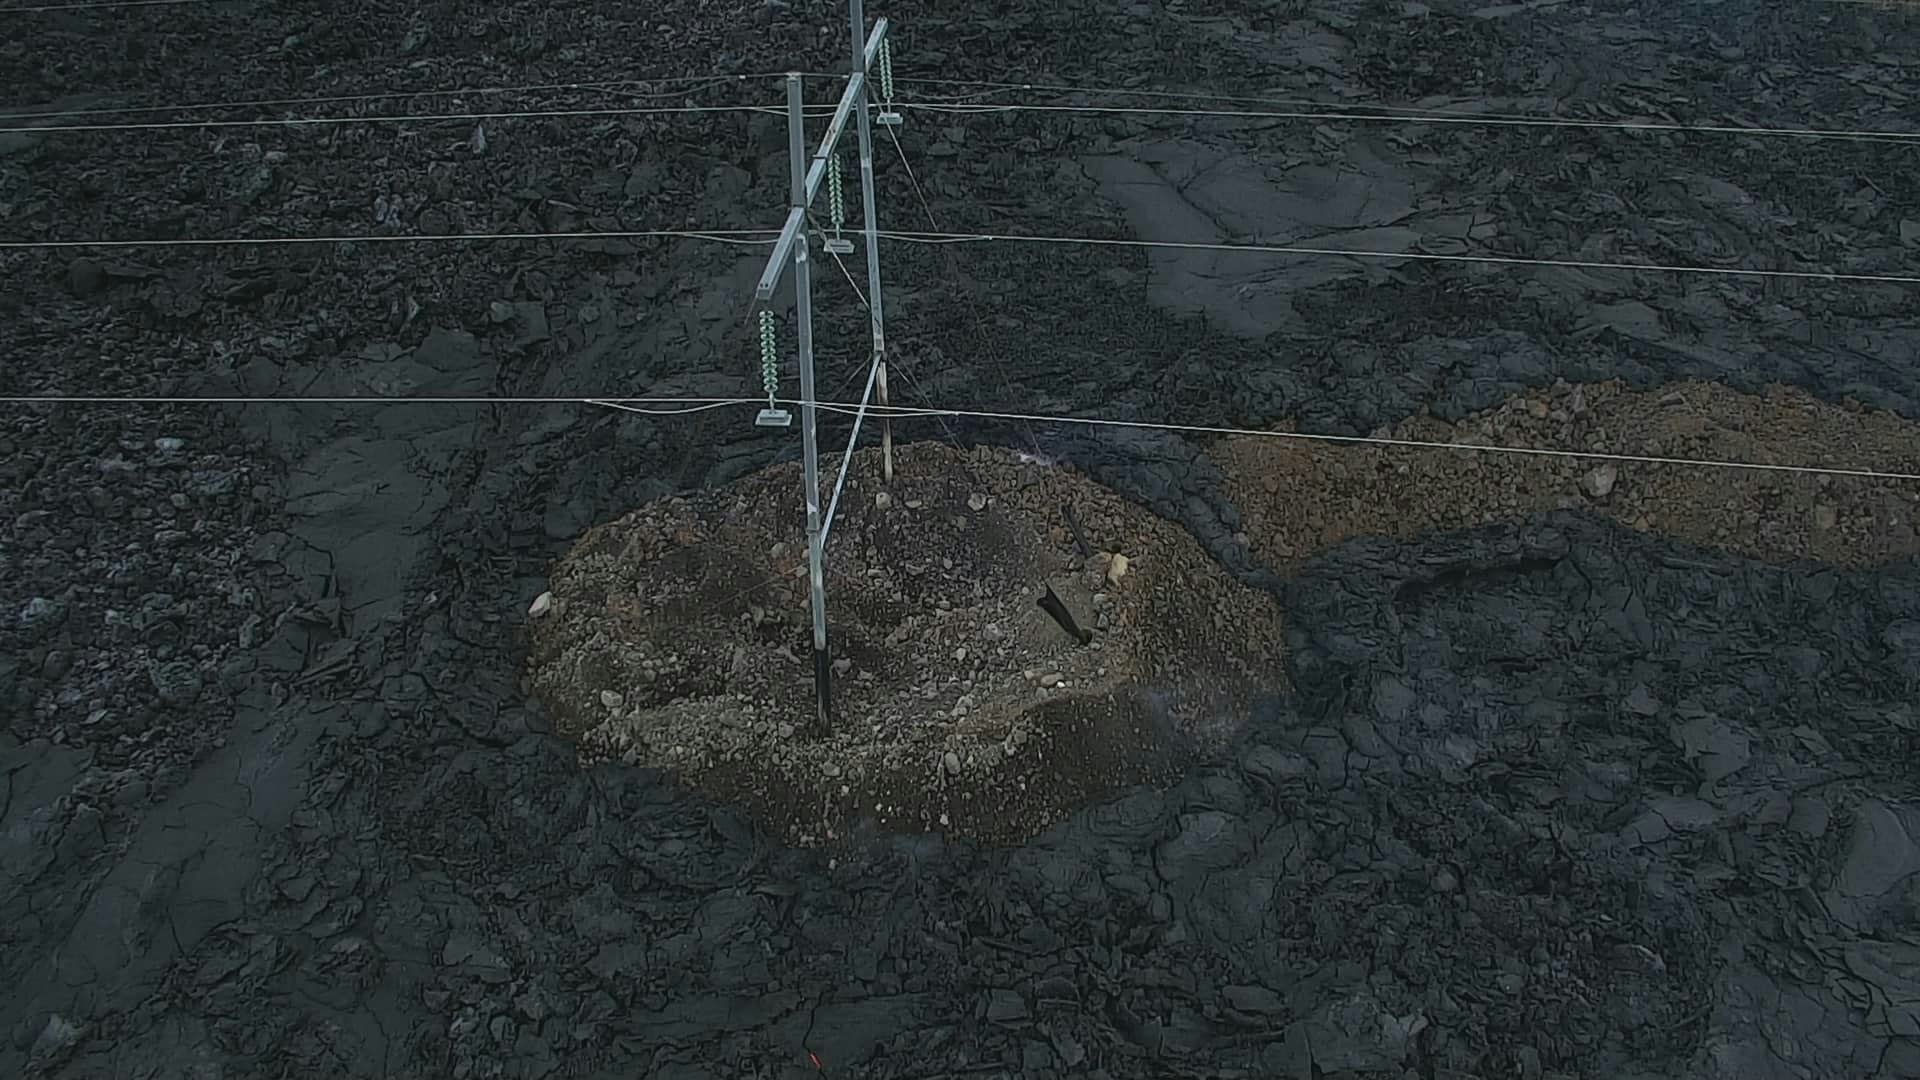 A high voltage lines wtih lava around it.